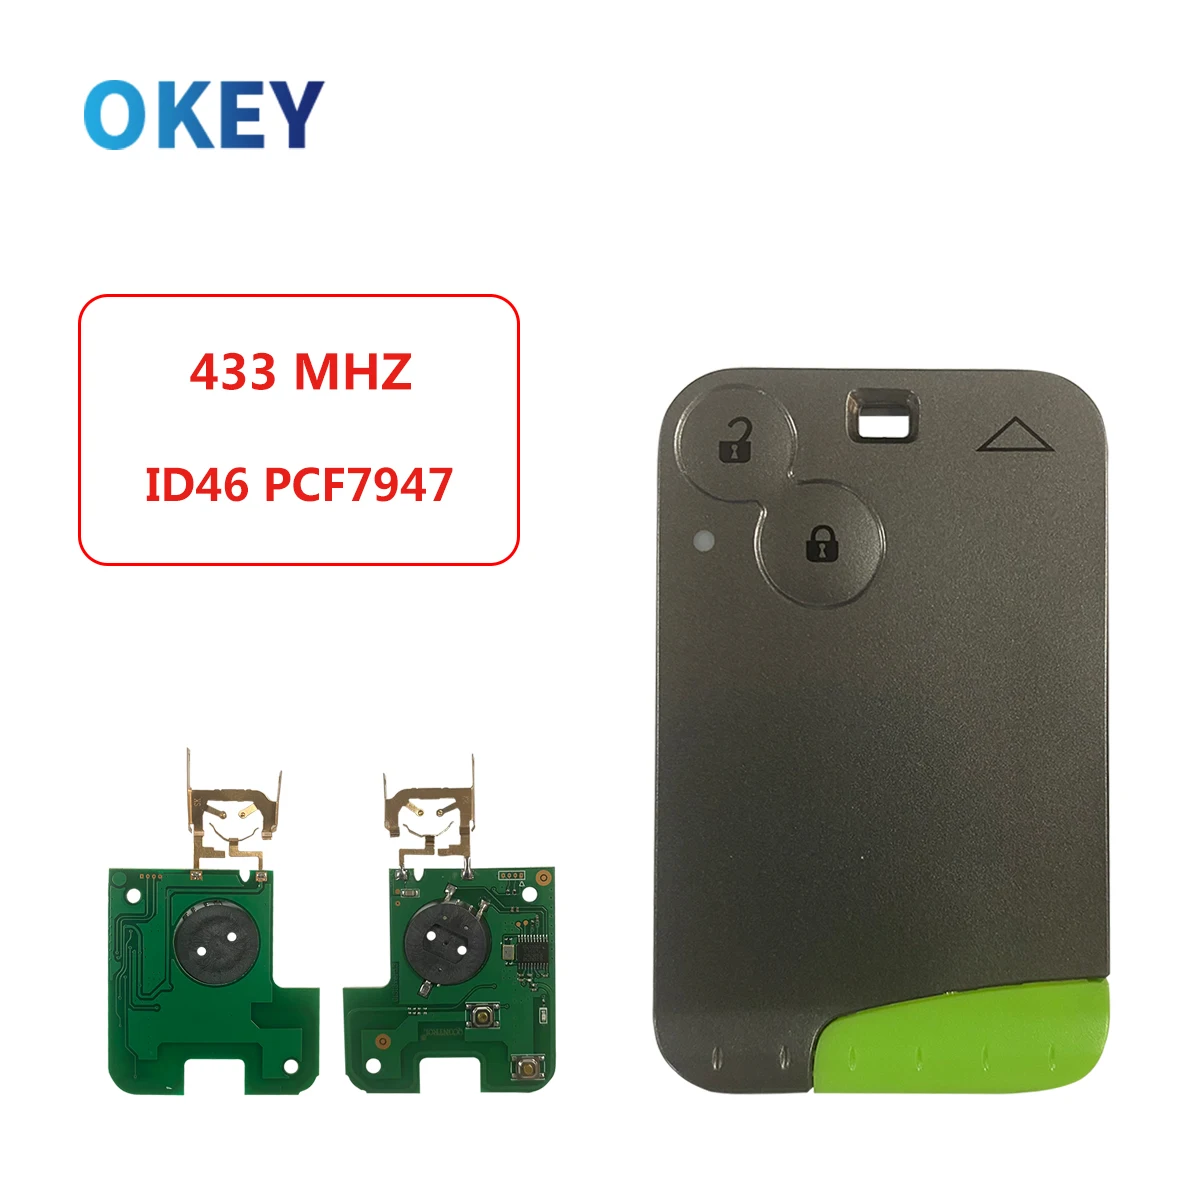 

Okey Remote Control Car Key For Renault Laguna Espace 2 Buttons 433Mhz Smart Key Card PCF7947 ID46 Chip Keyless Entry